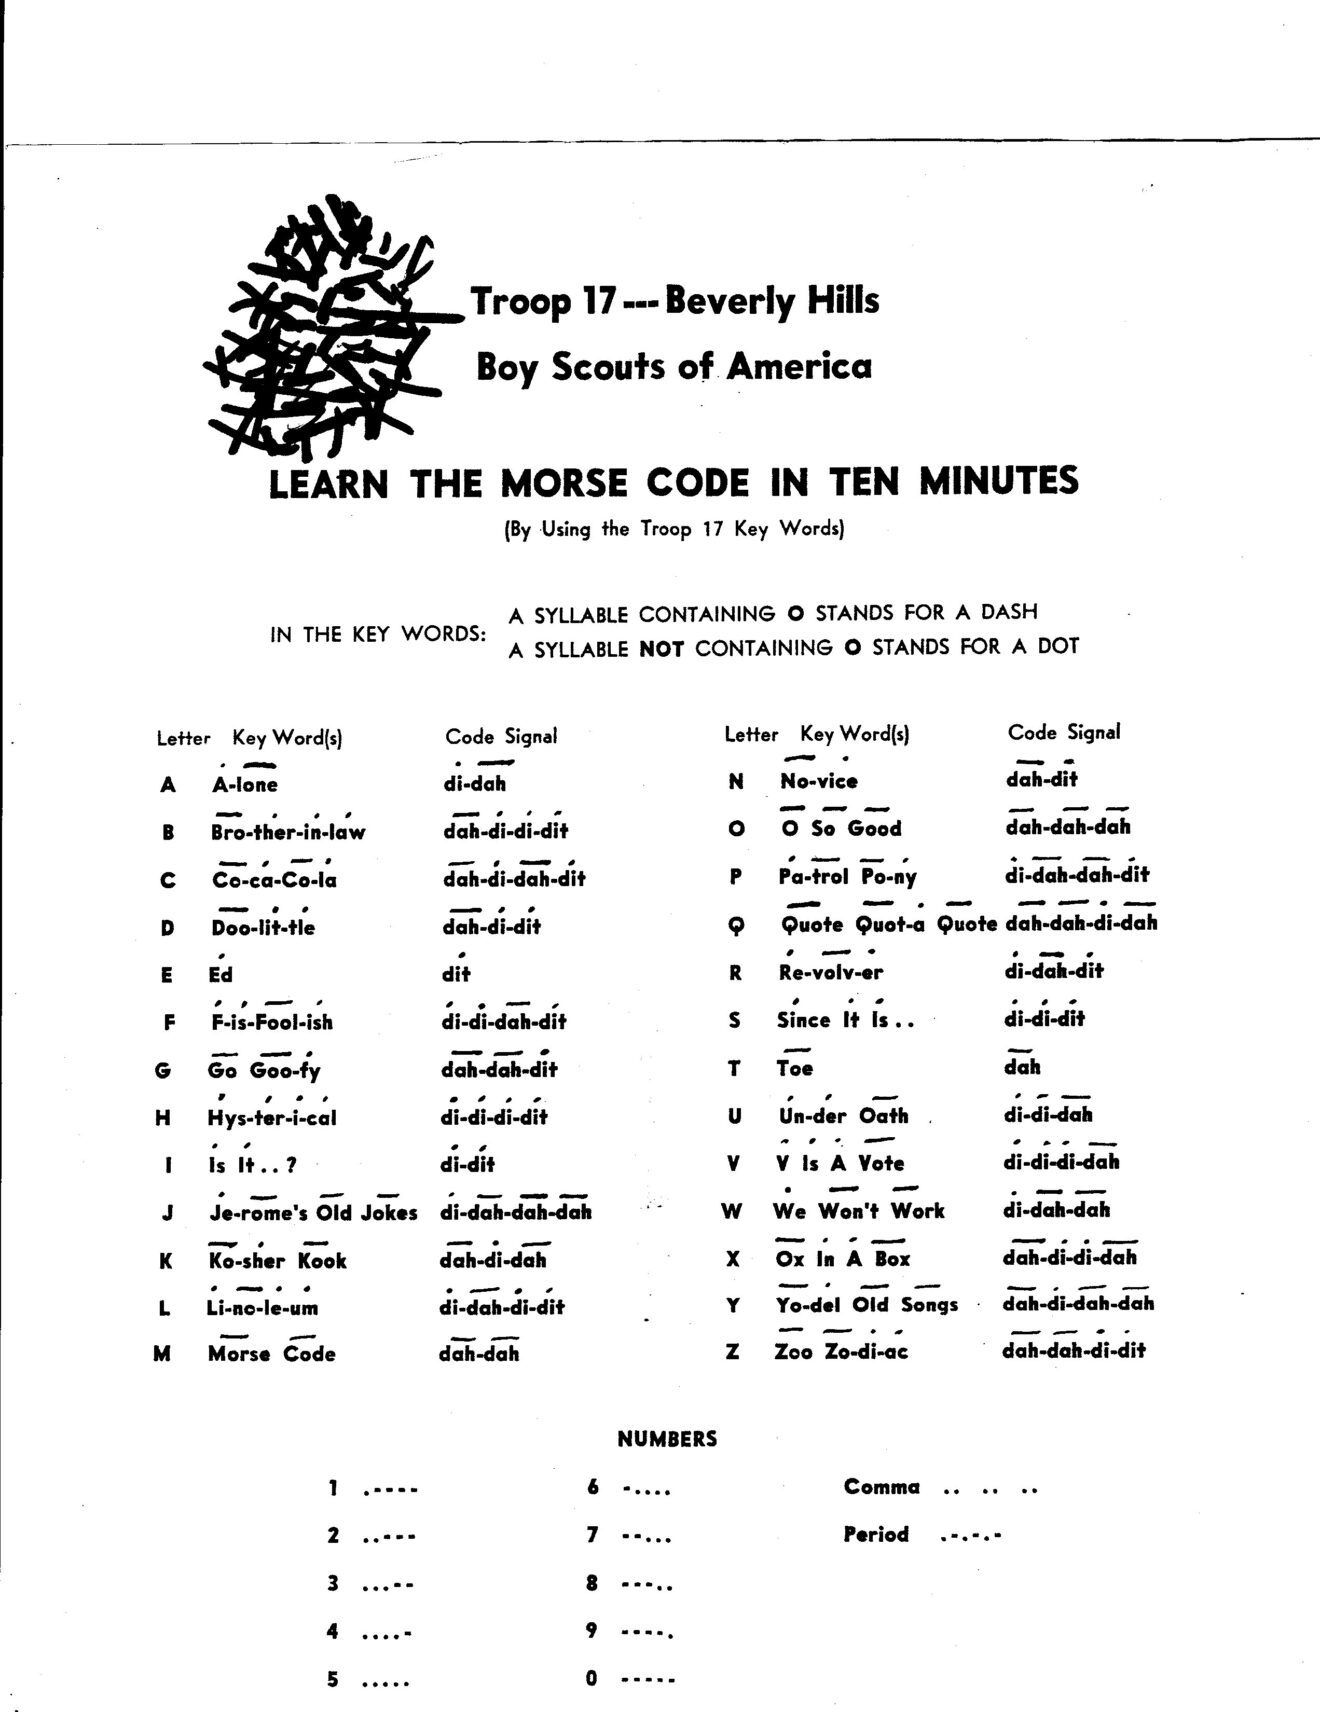 Learn the Morse Code in Ten Minutes by Ben Graham 